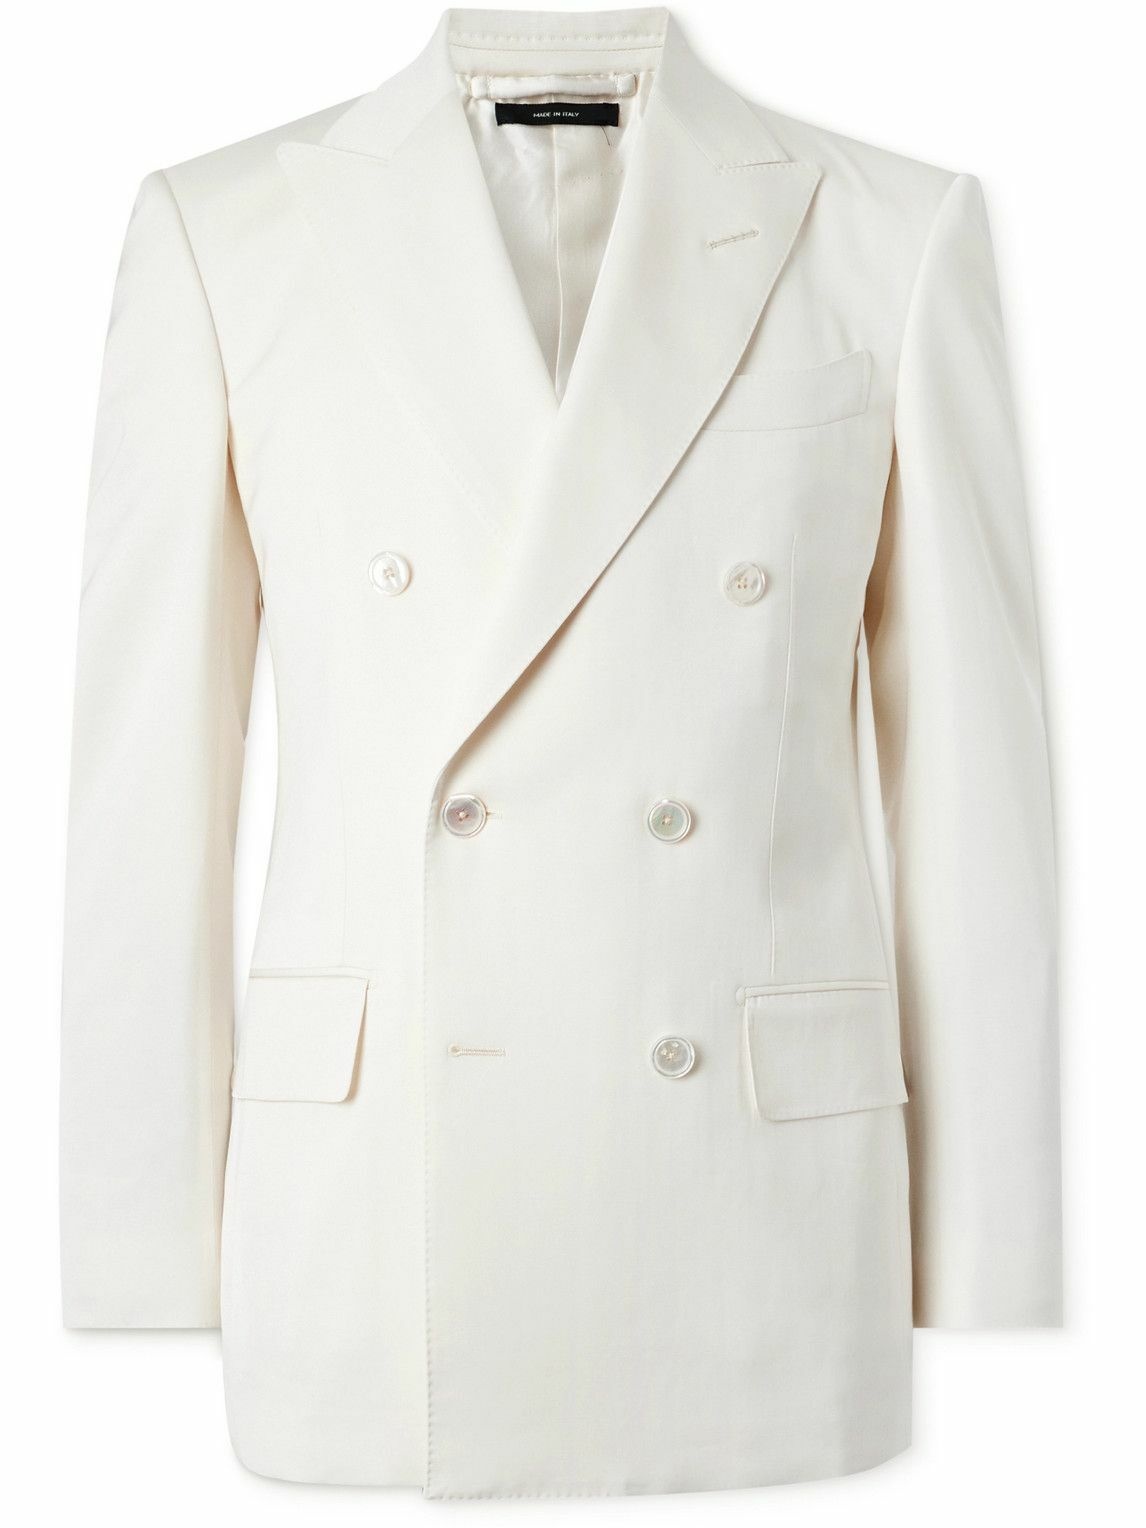 TOM FORD - Double-Breasted Woven Tuxedo Jacket - White TOM FORD